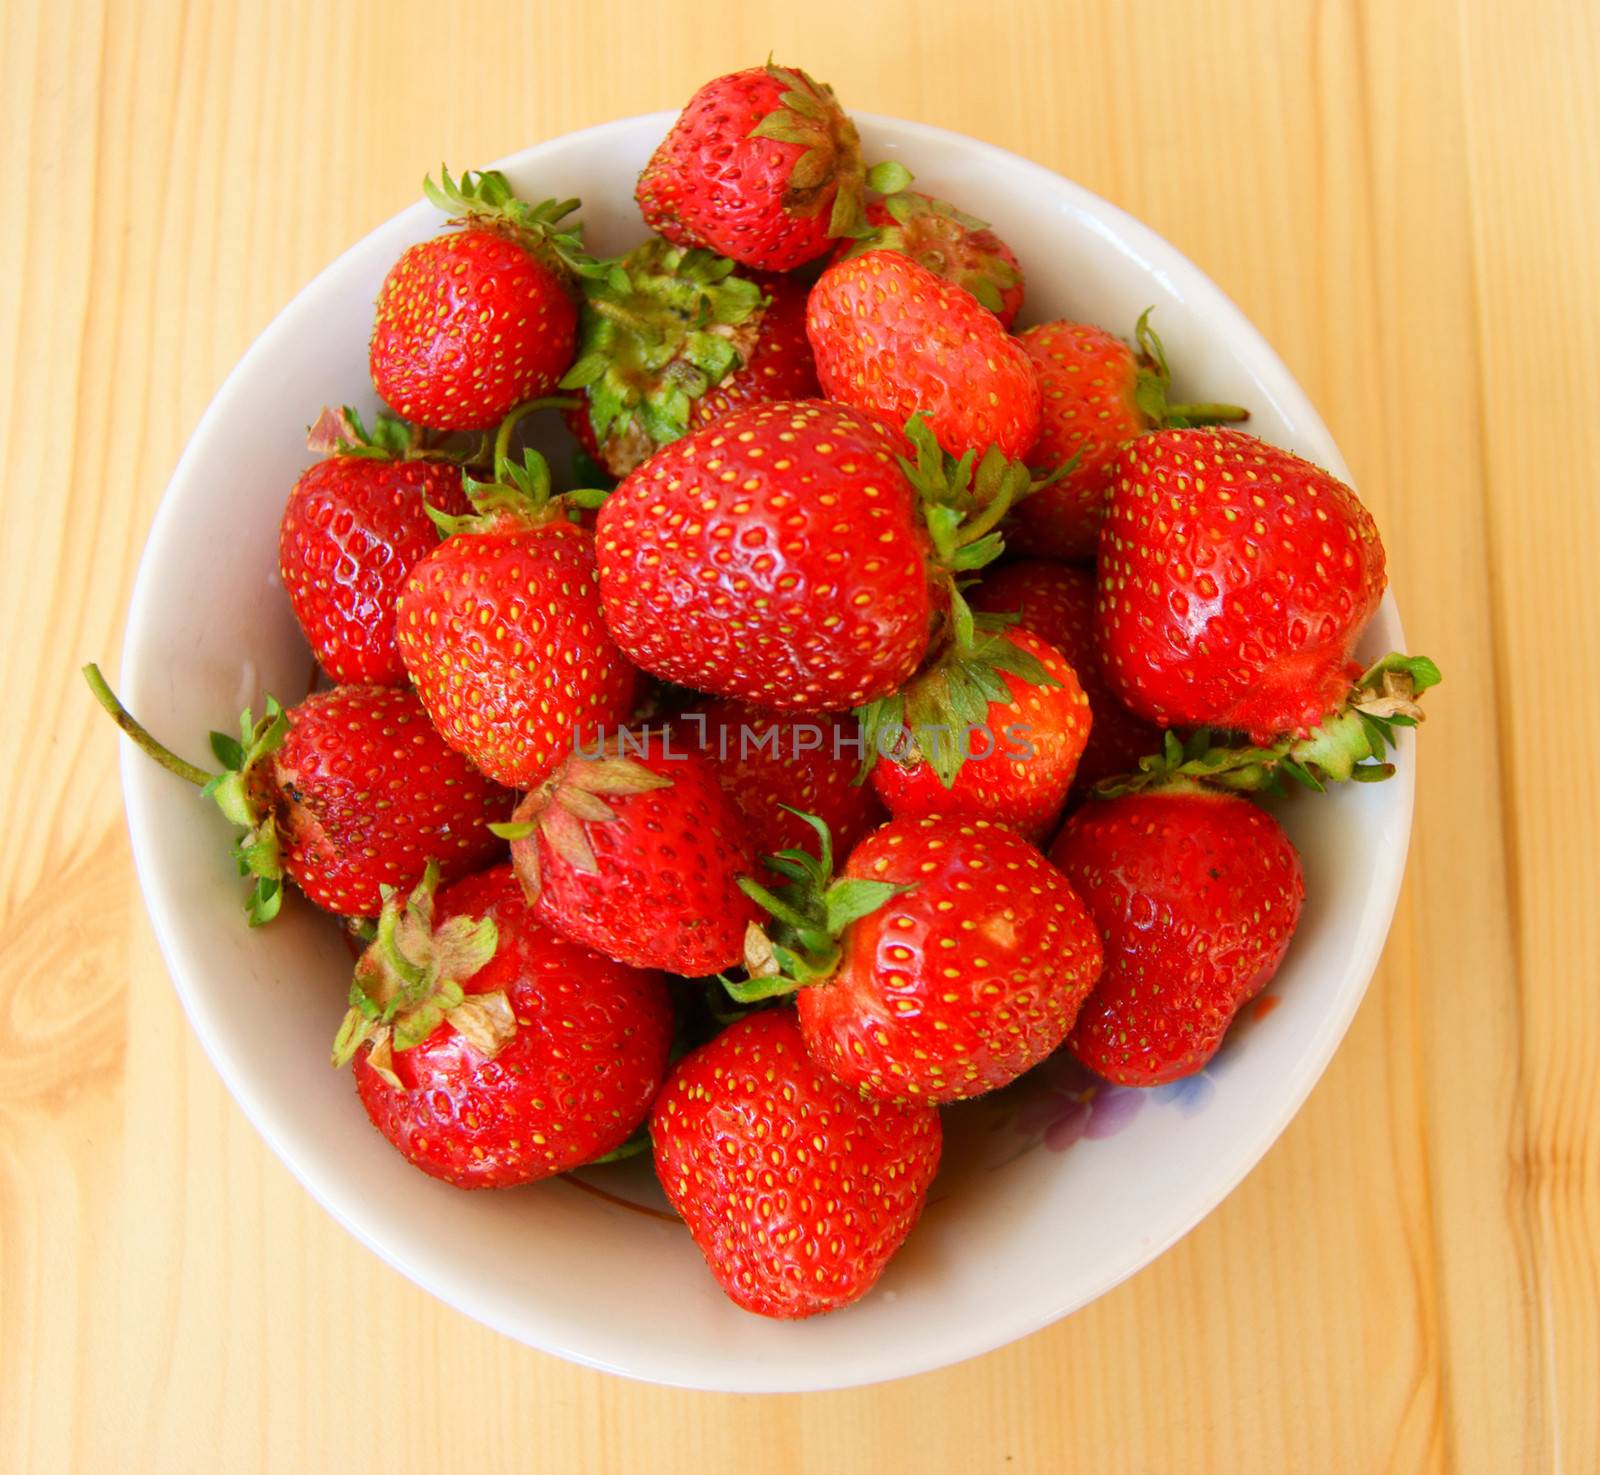 Ripe berry strawberry on wooden table